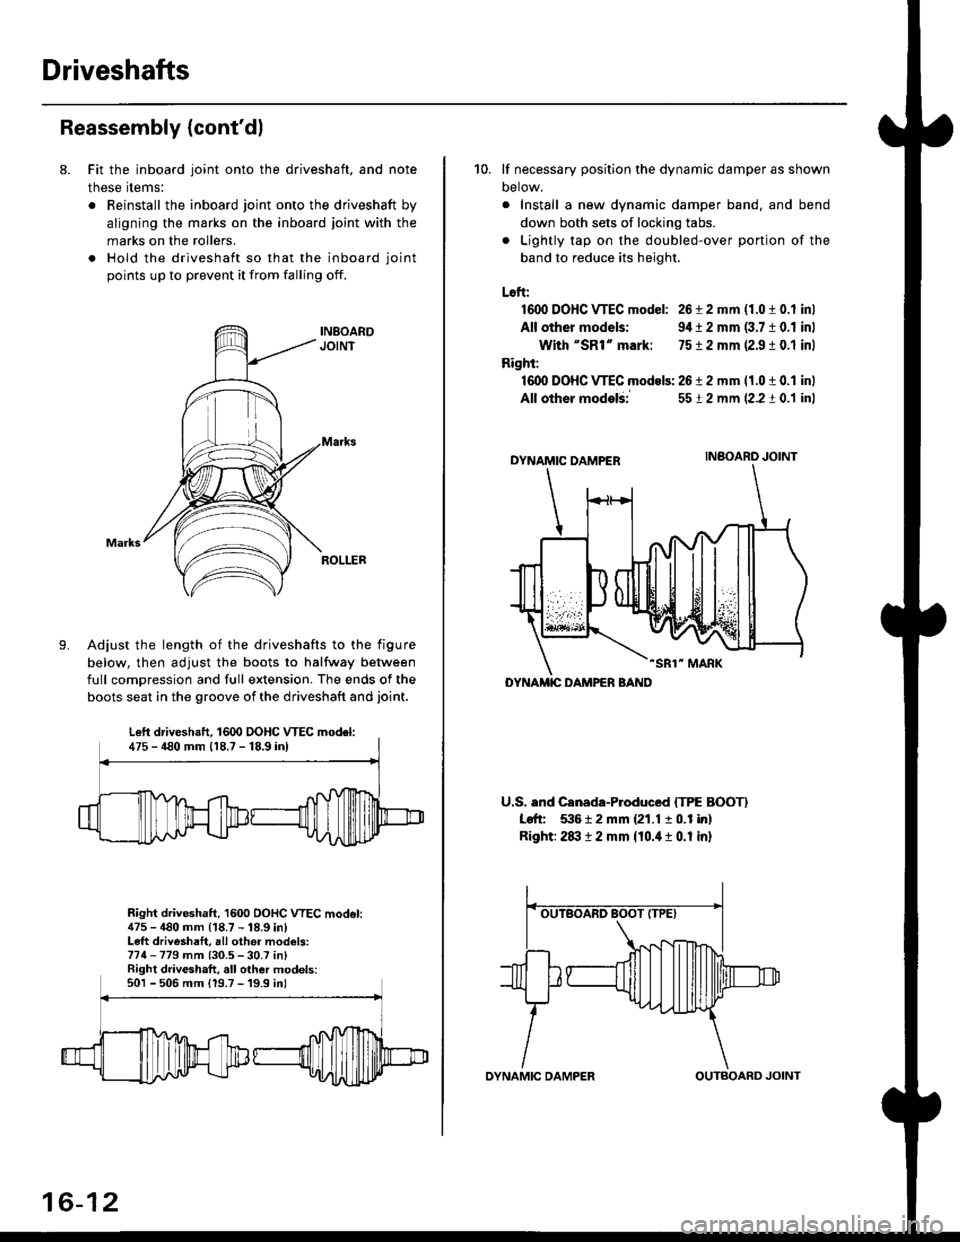 HONDA CIVIC 1998 6.G Service Manual Driveshafts
Reassembly (contdl
8. Fit the inboard joint onto the driveshaft, and note
these items:
. Reinstall the inboard joint onto the driveshaft by
aligning the marks on the inboard joint with th